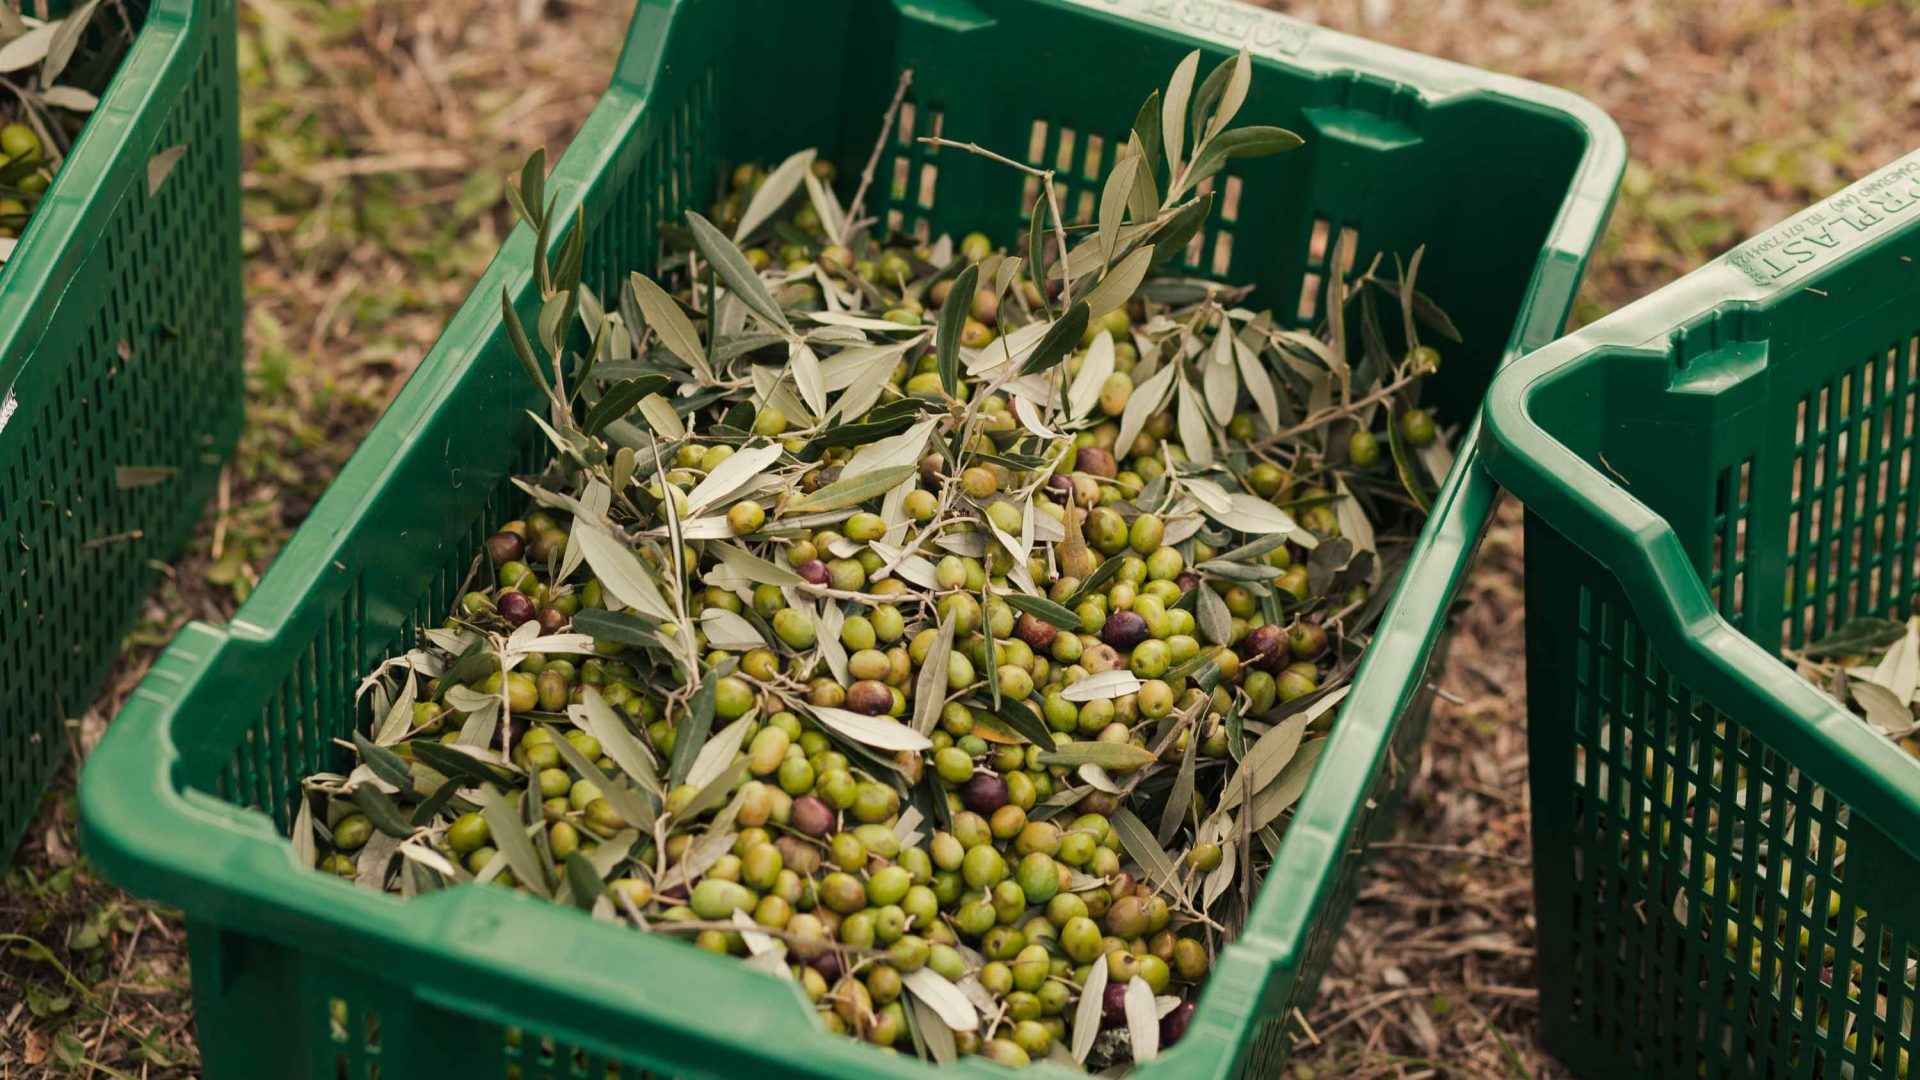 Harvested olives ready to be pressed into oil.